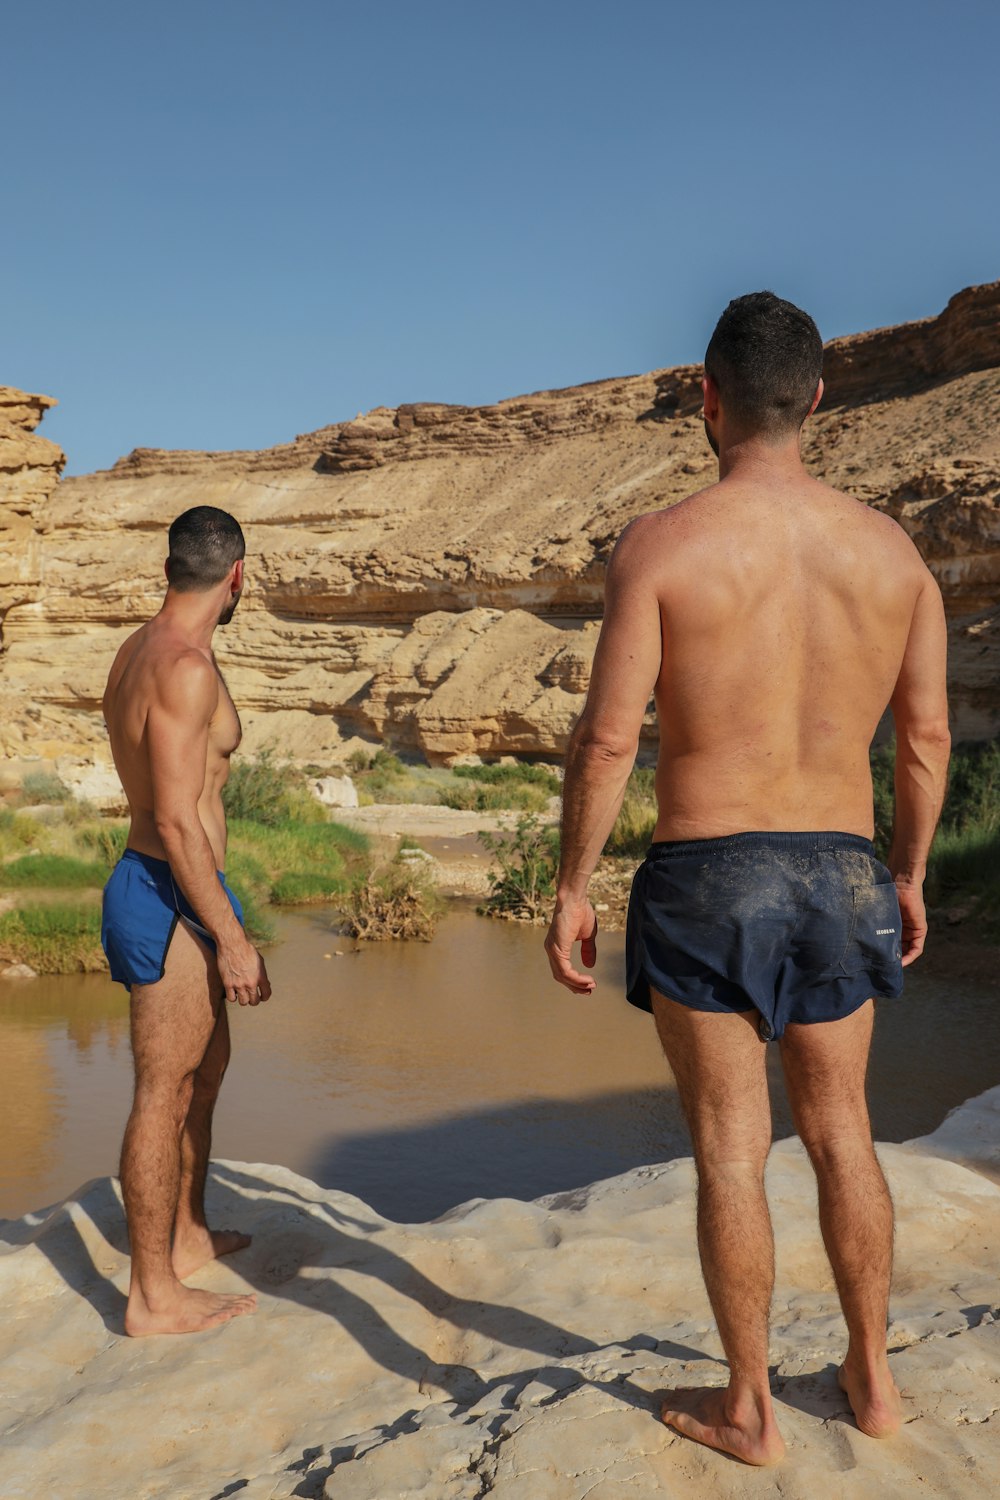 2 men standing on rock near body of water during daytime